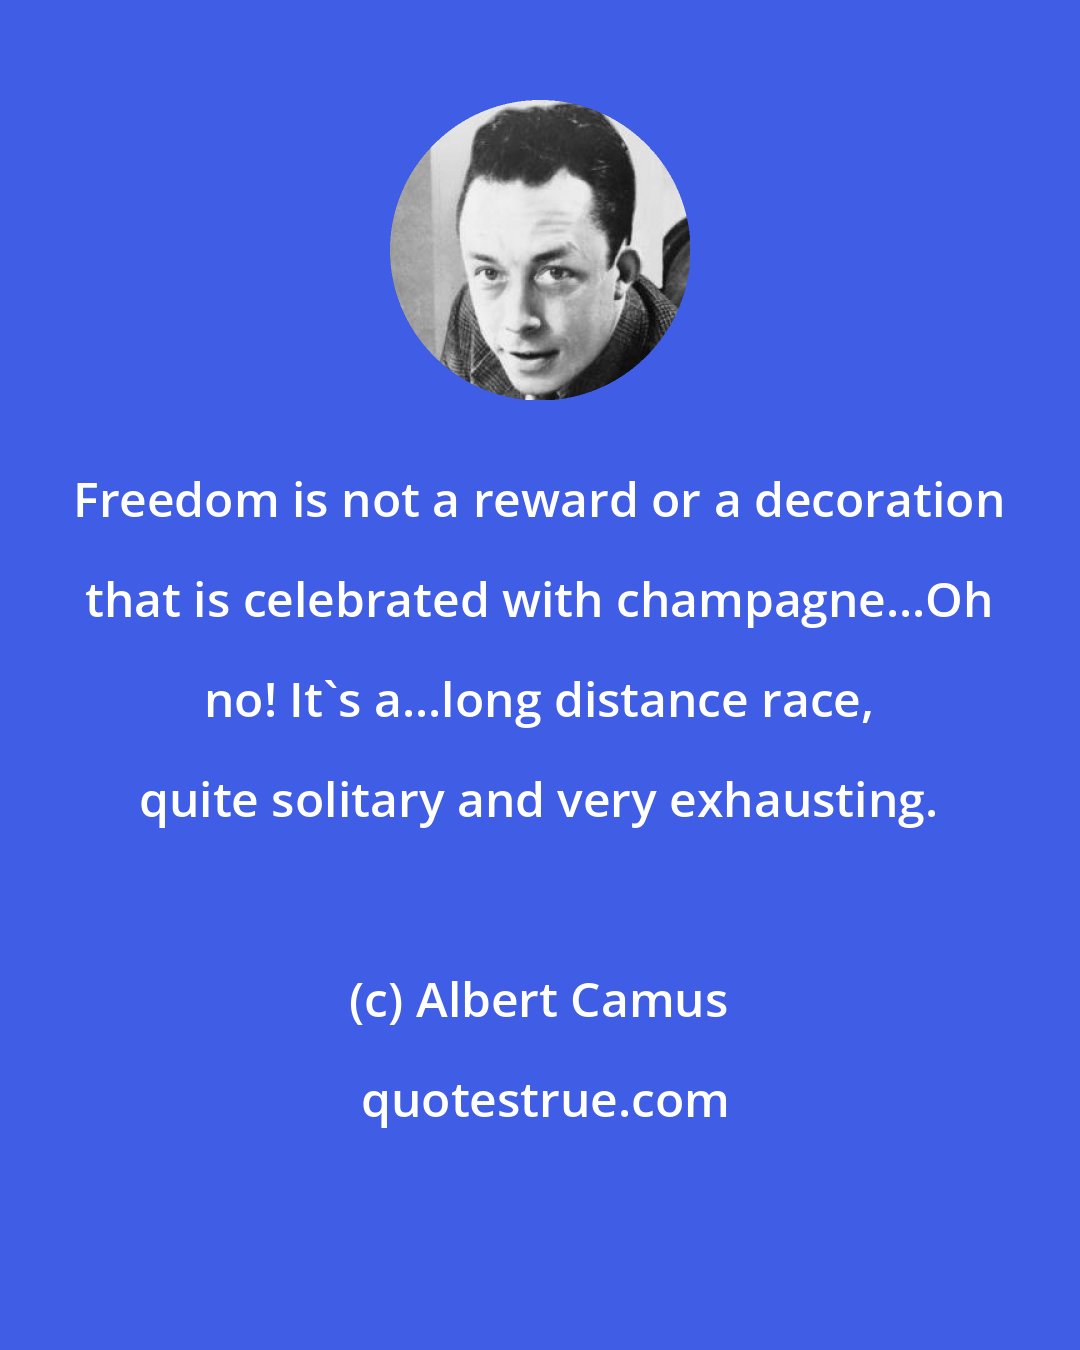 Albert Camus: Freedom is not a reward or a decoration that is celebrated with champagne...Oh no! It's a...long distance race, quite solitary and very exhausting.